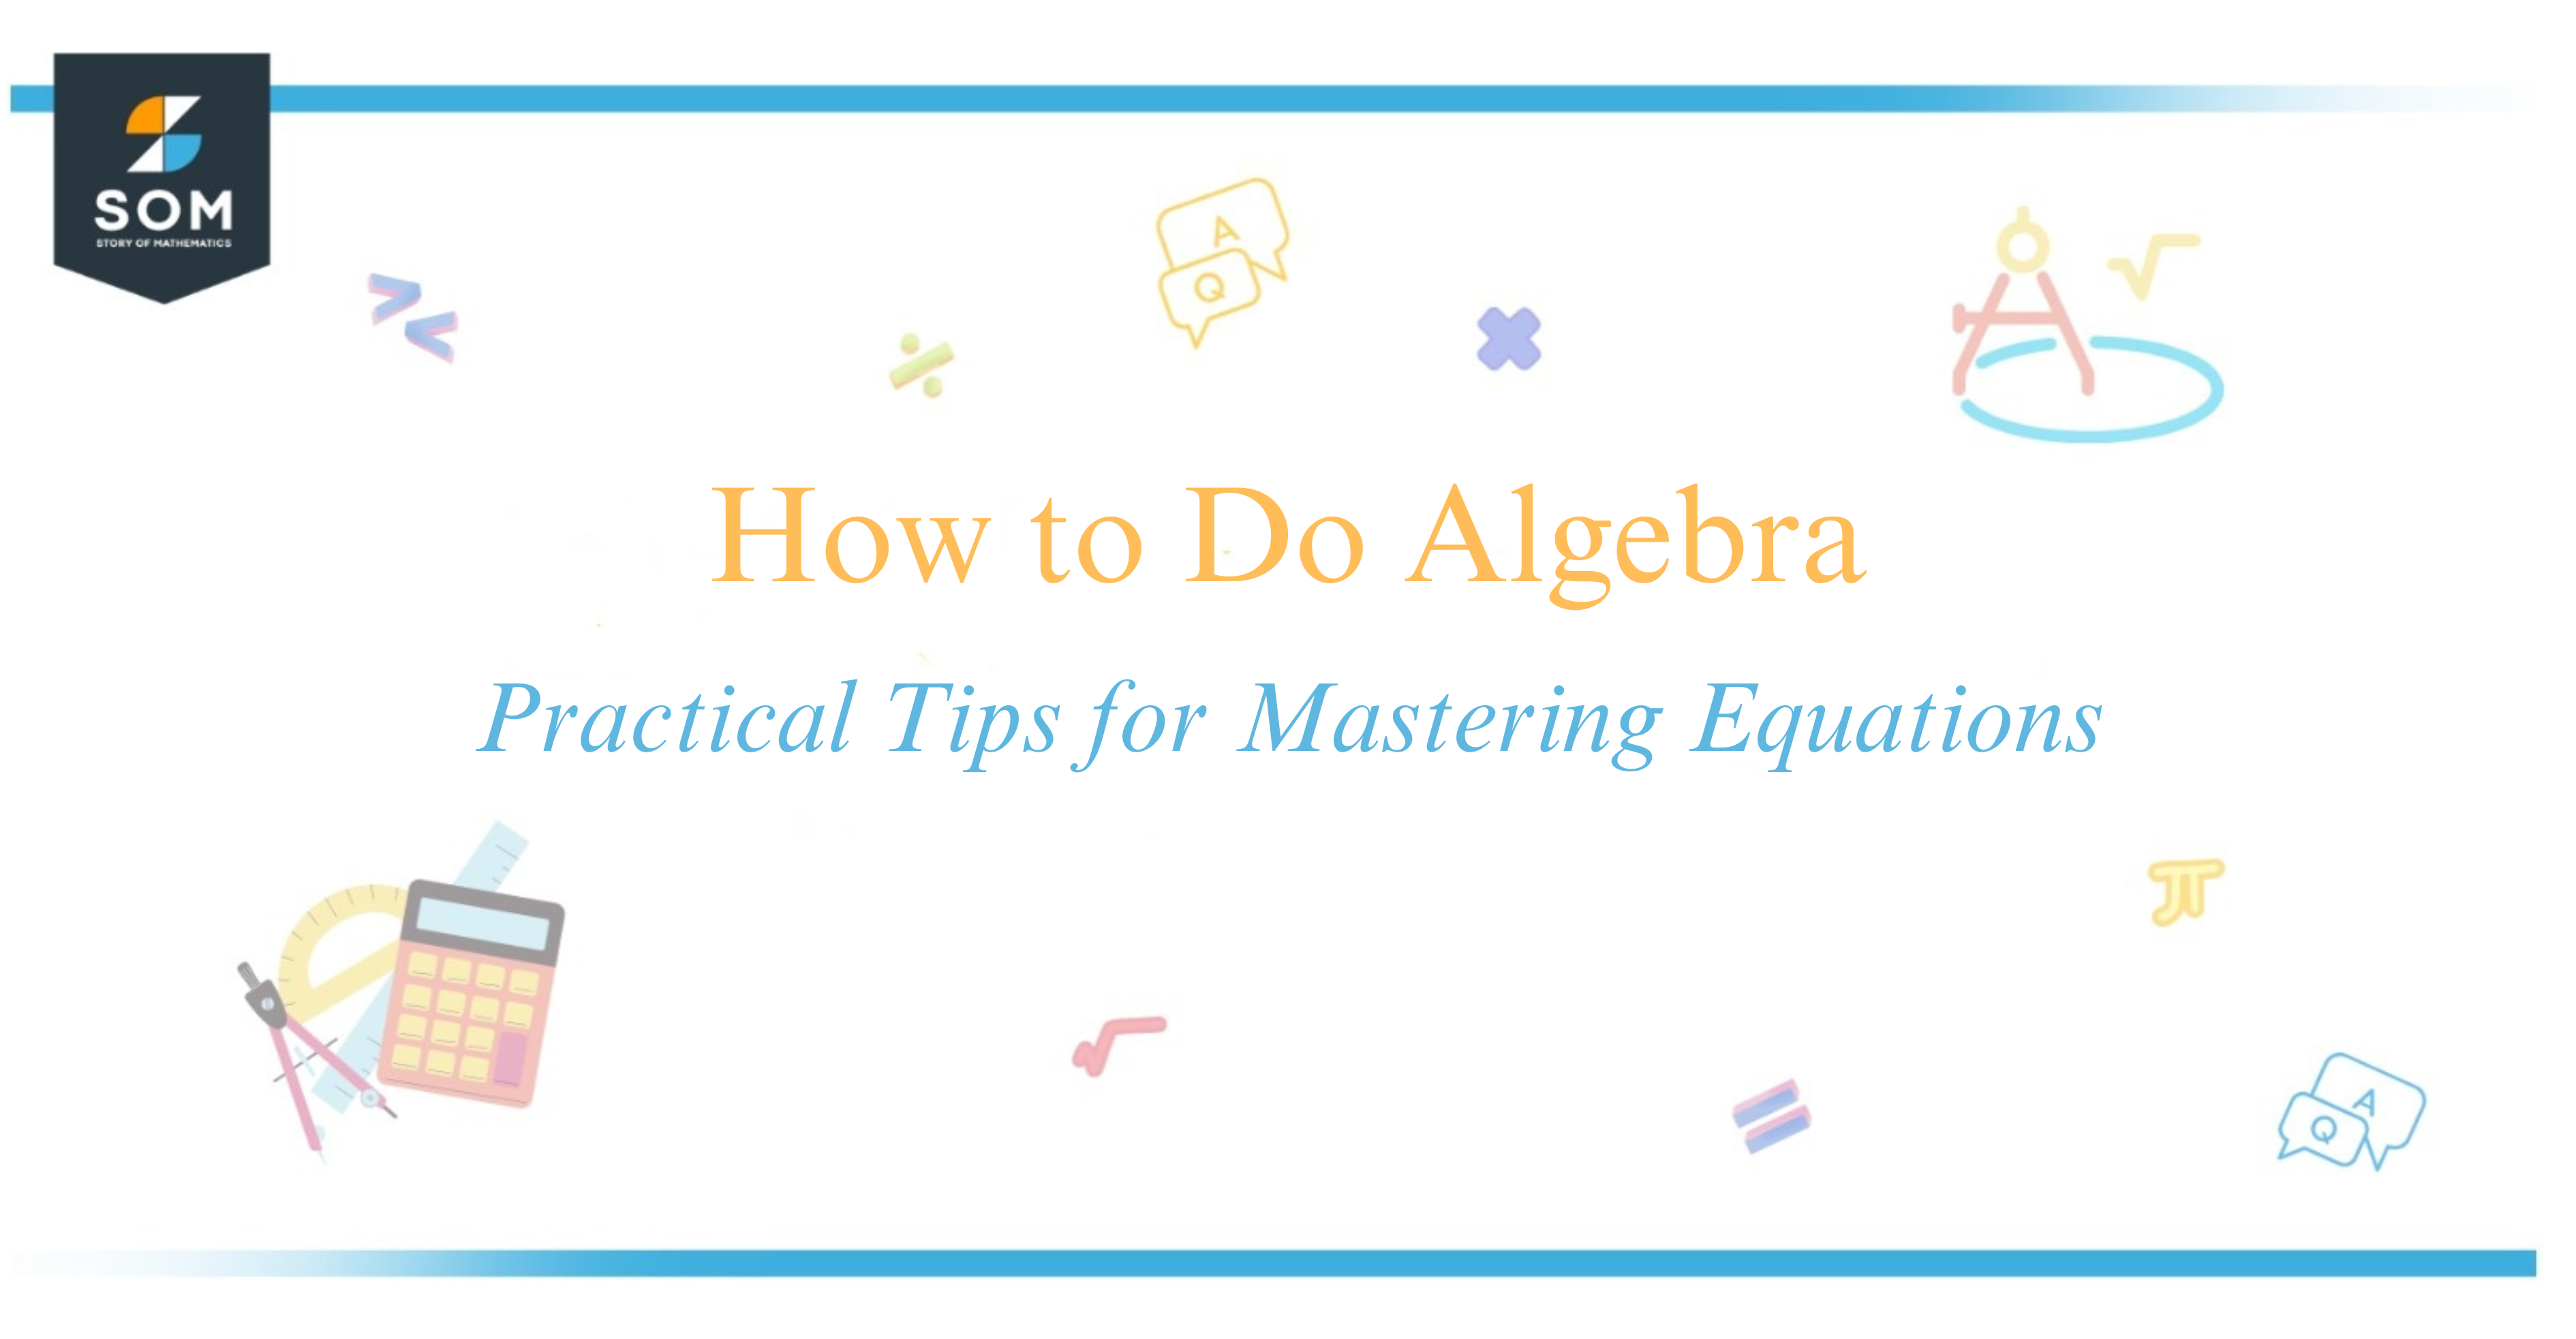 How to Do Algebra Practical Tips for Mastering Equations